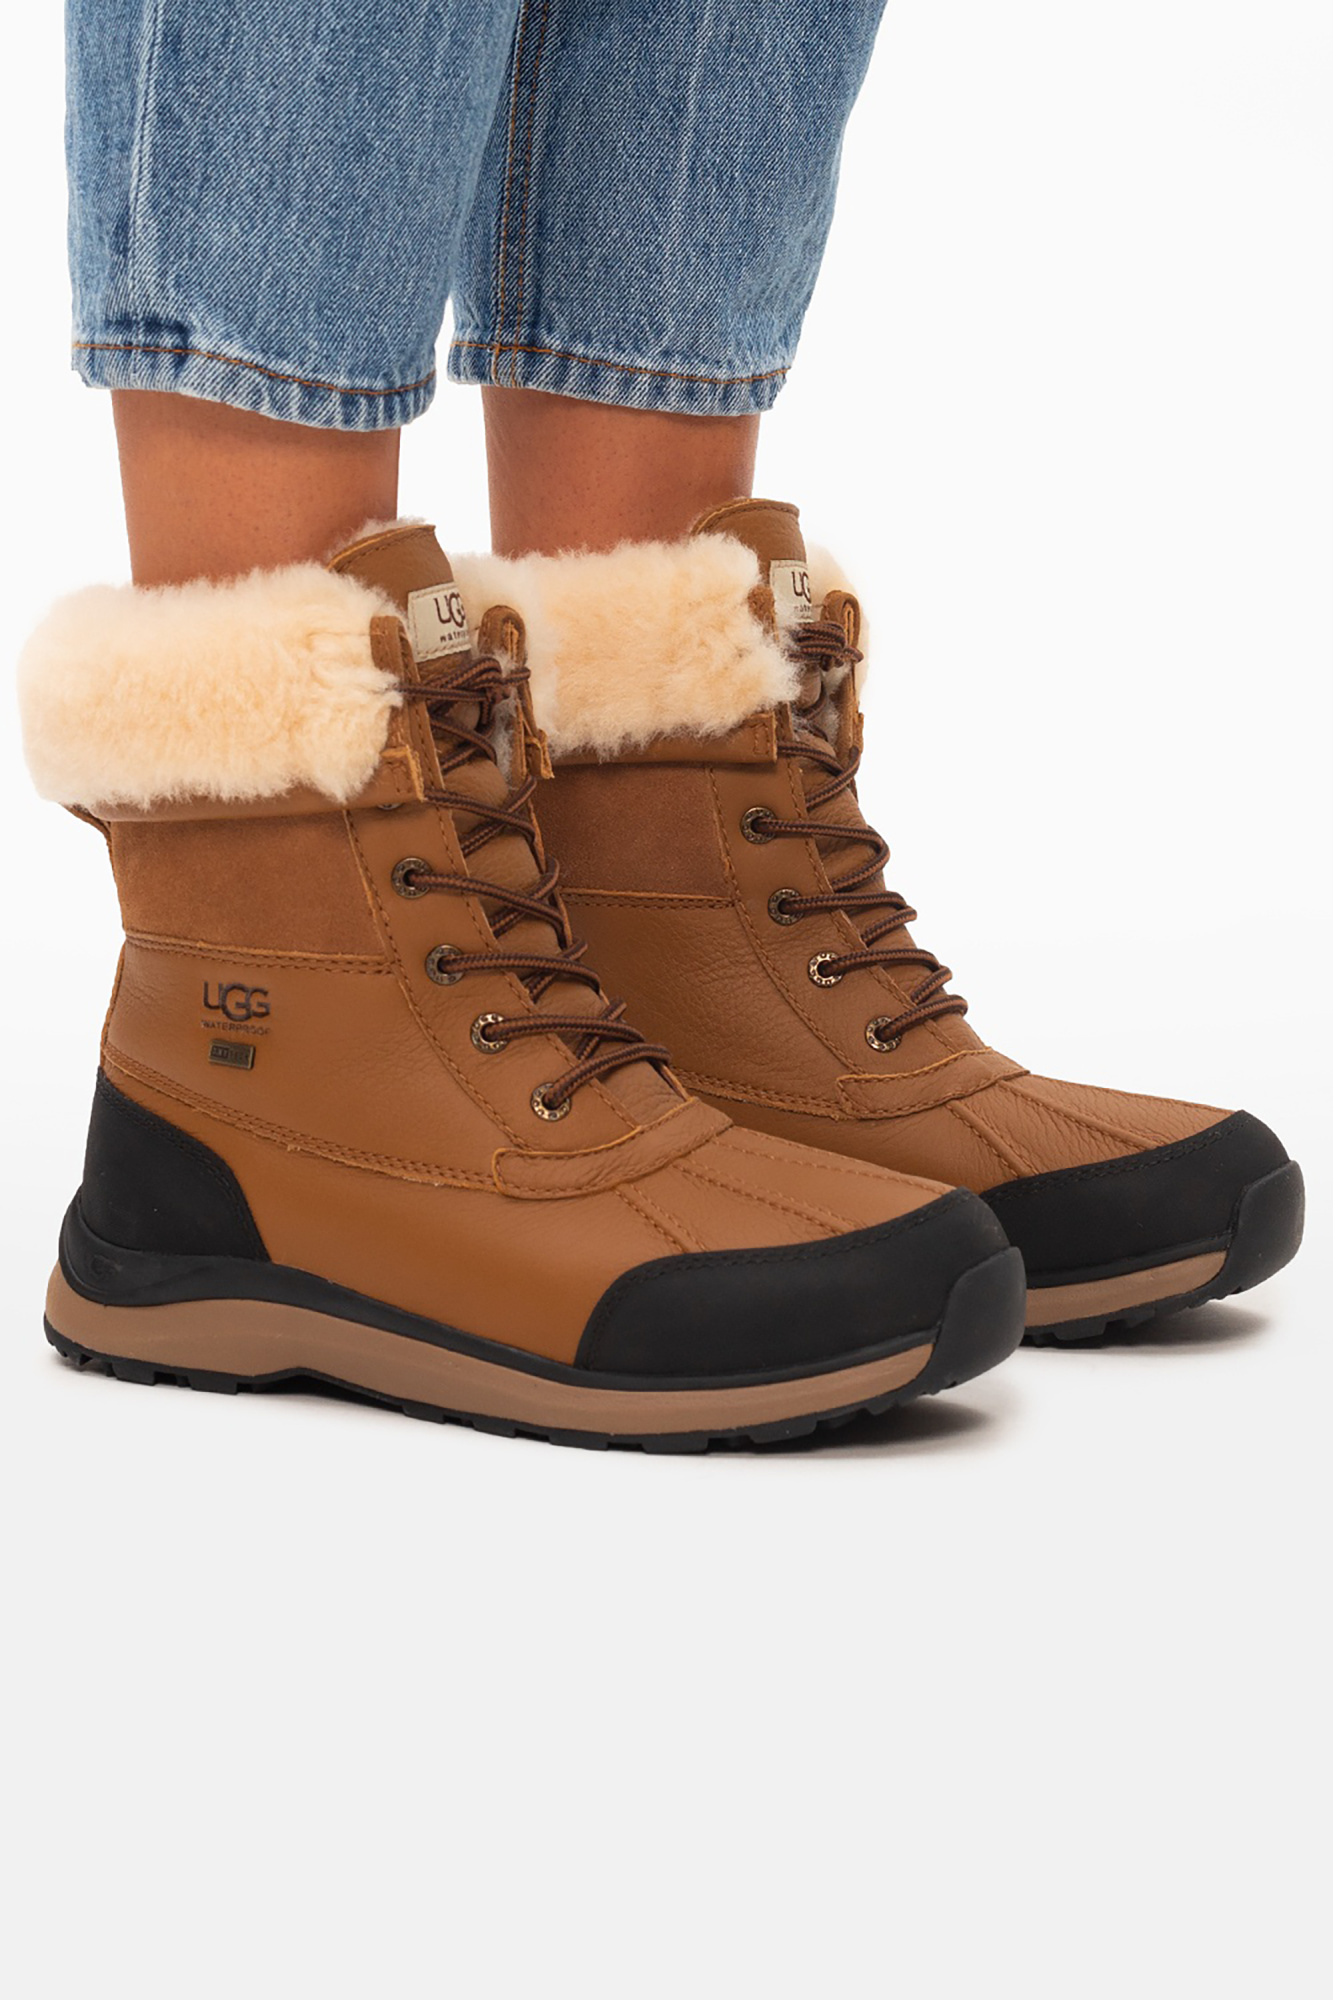 Ugg Waterproof Lace Up Boots